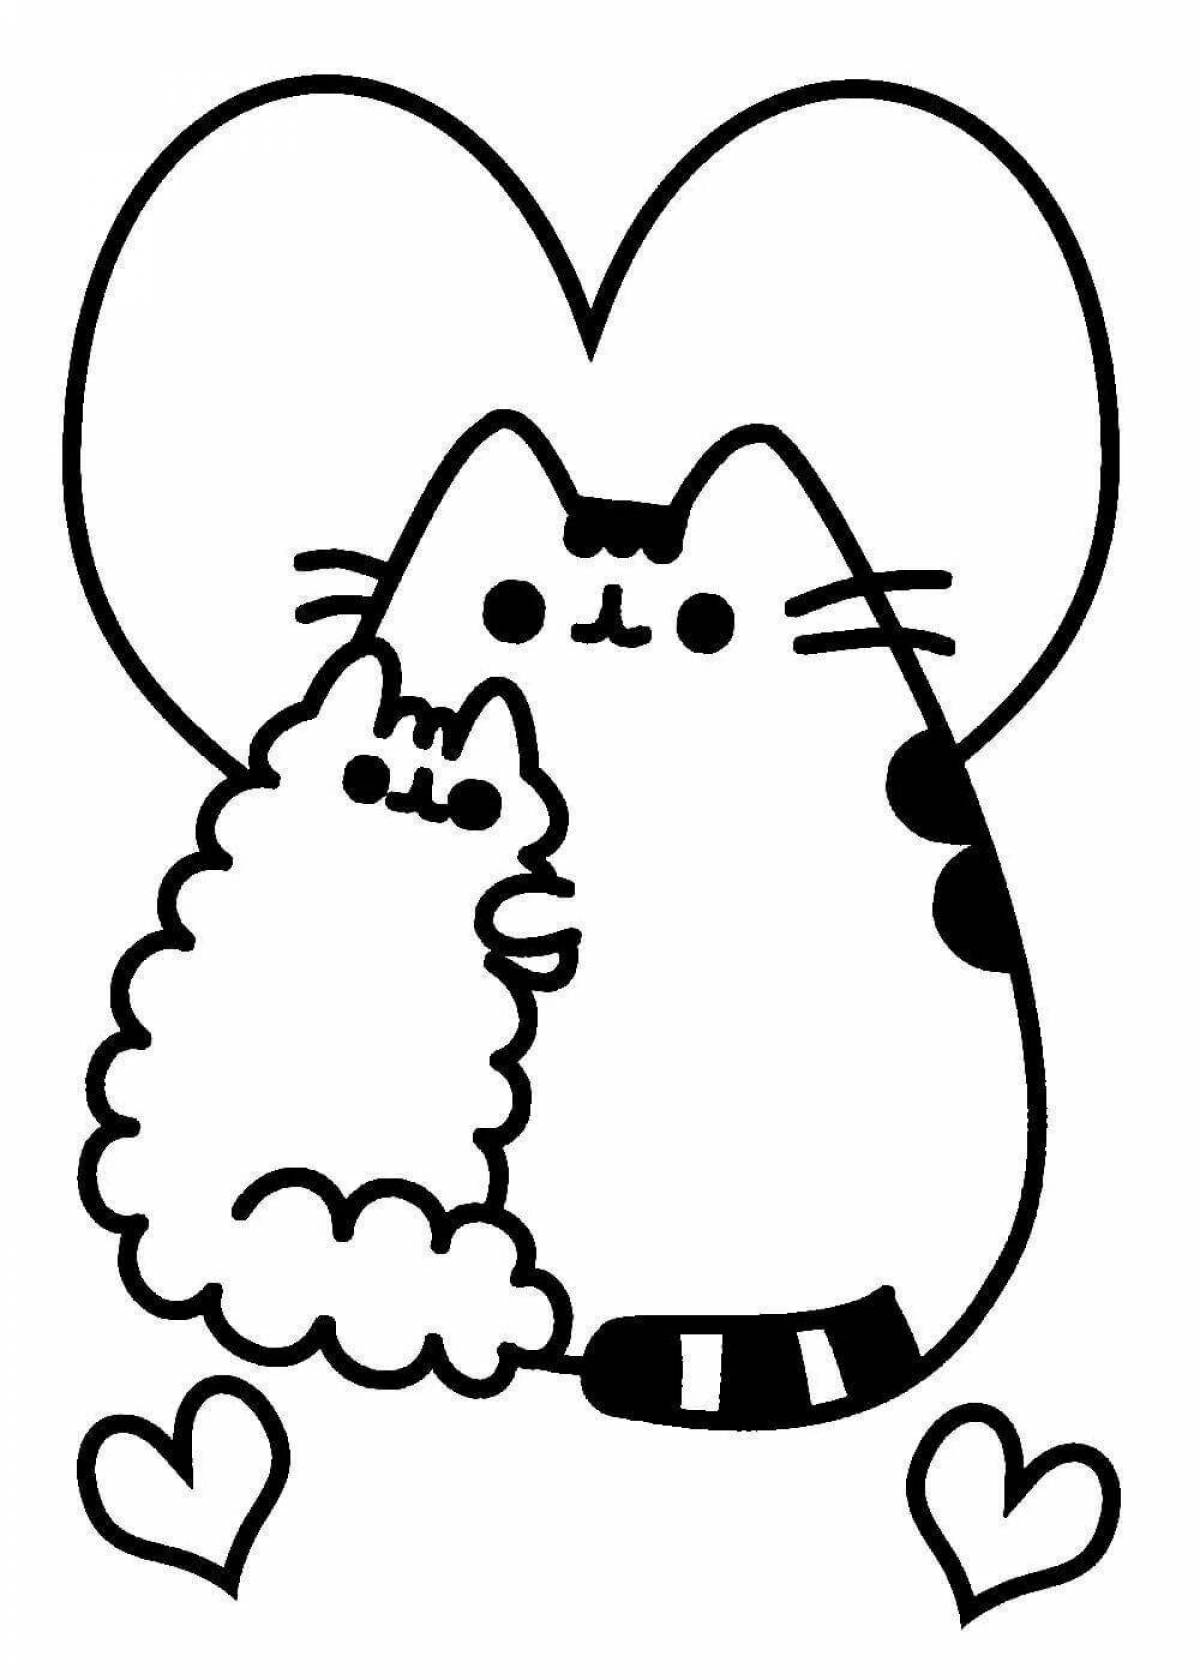 Coloring page sparkling pusheen cat